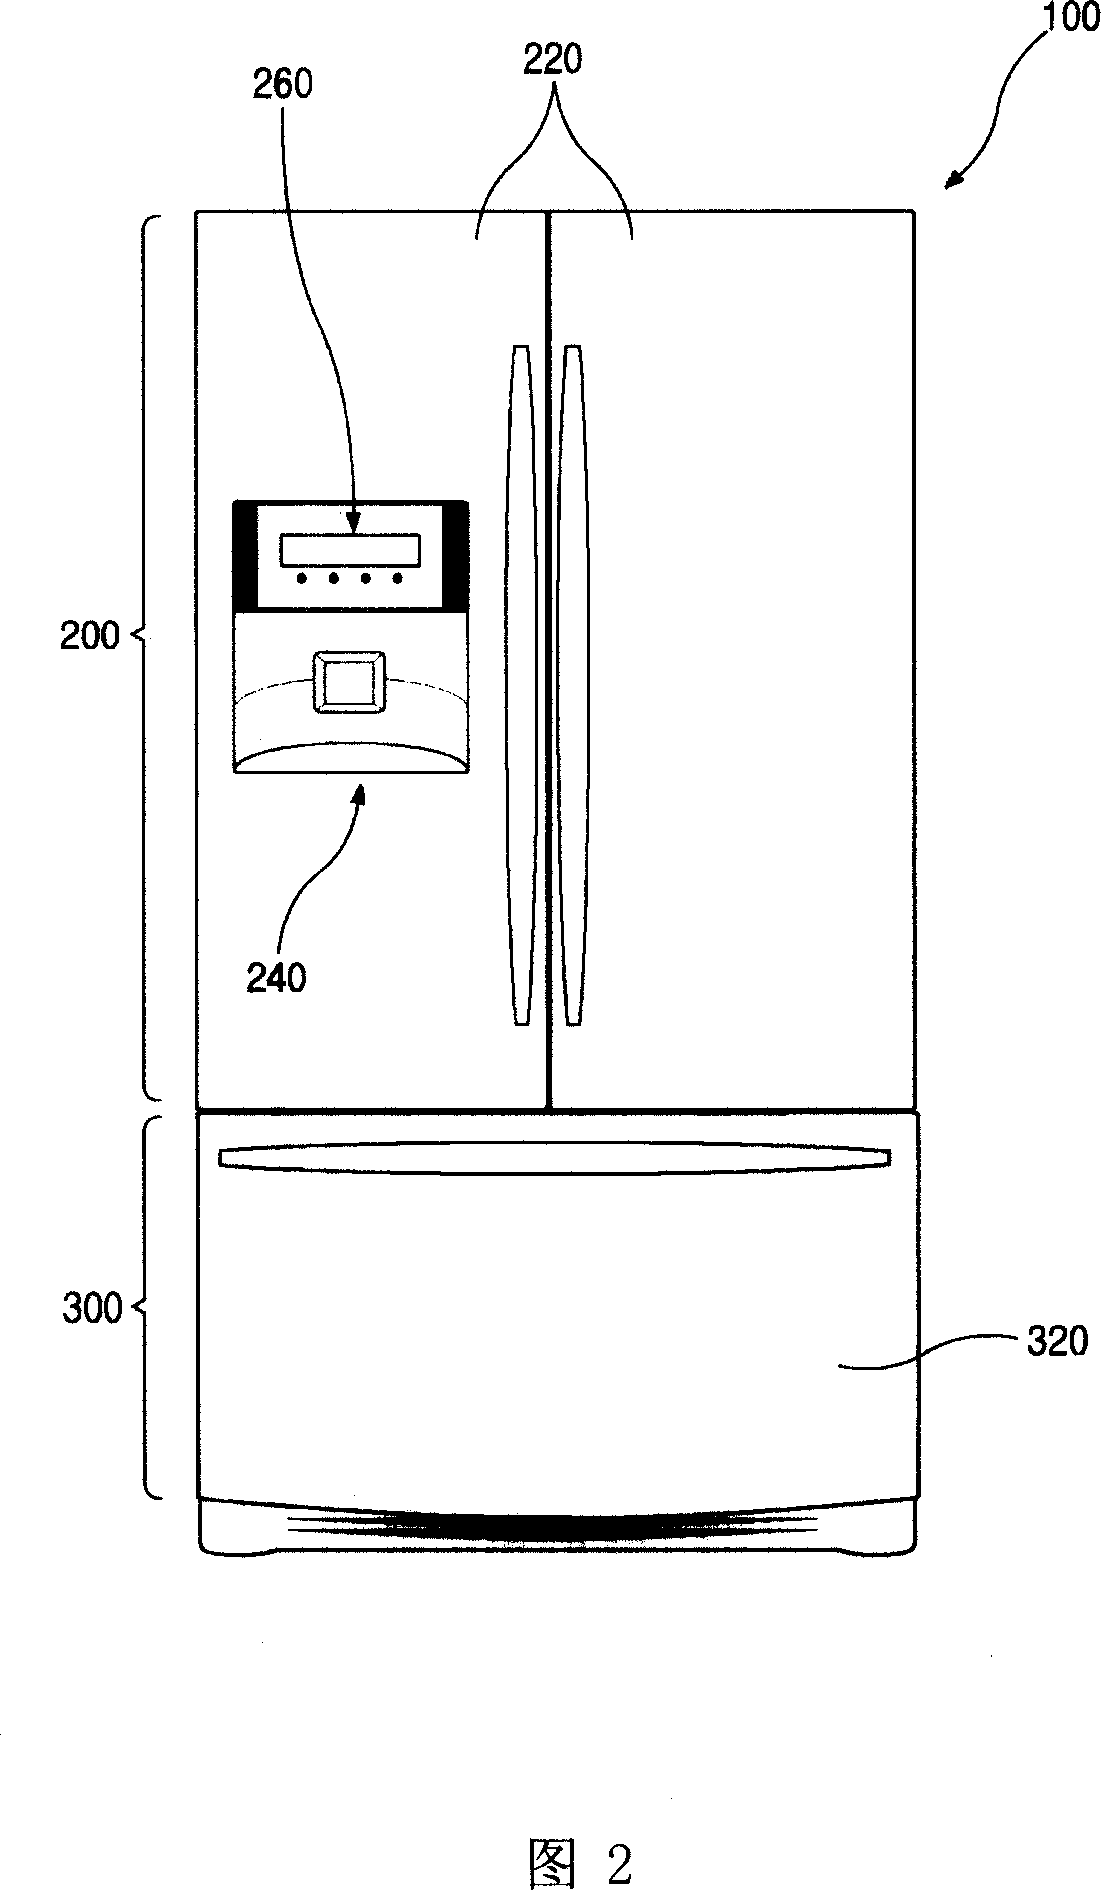 Structure for setting ice-maker connector of refrigerator